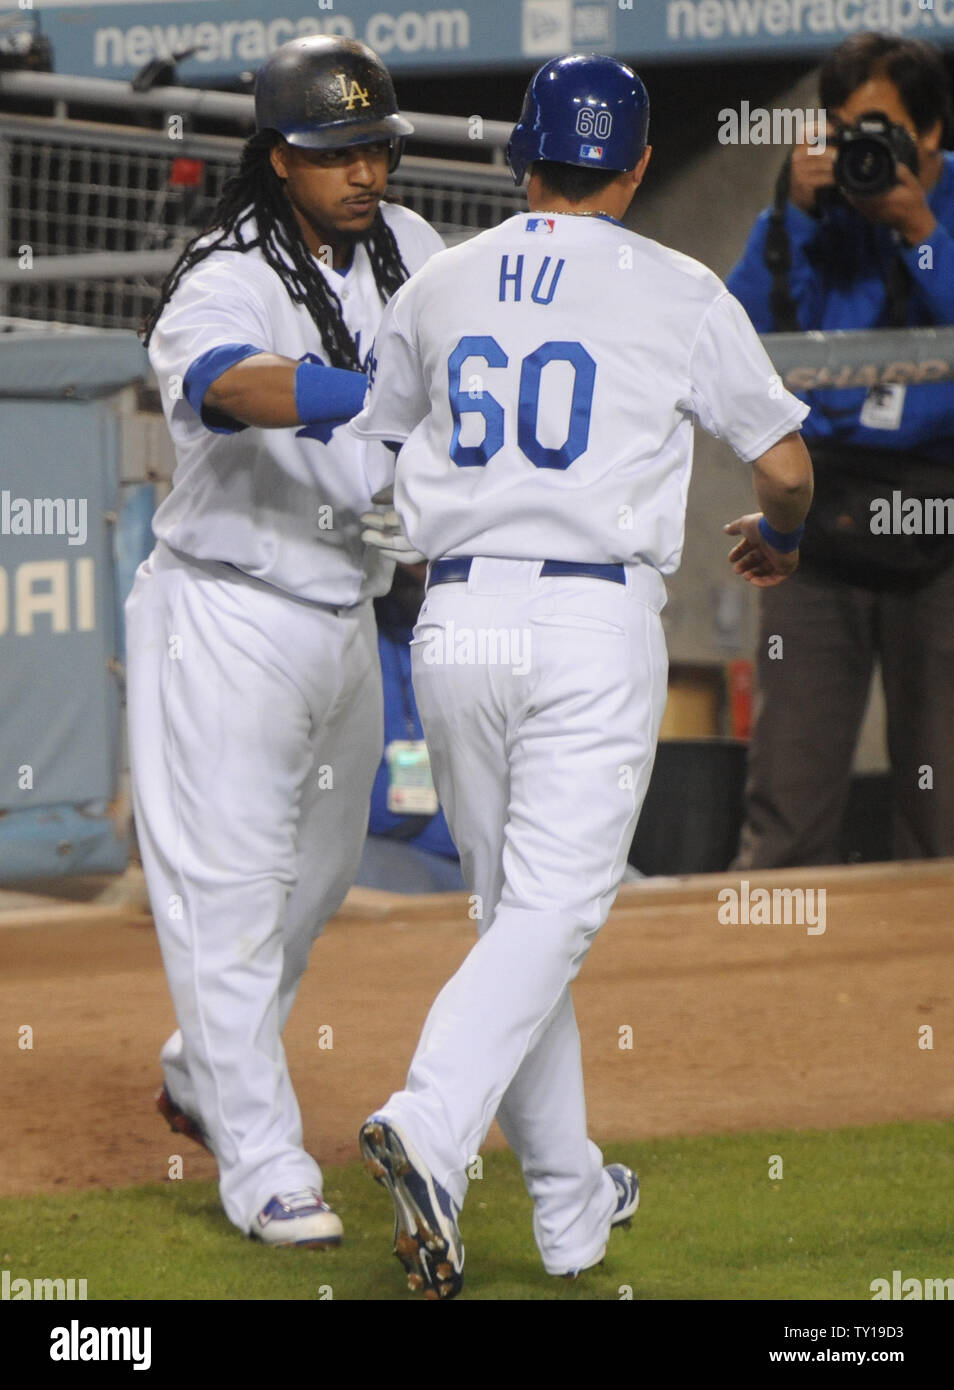 Los Angeles Dodgers' Manny Ramirez (99) celebrates with Chin-lung Hu (60) after Hu scored in the 5-run seventh inning against the Colorado Rockies in Los Angeles on October 3, 2009. The Dodgers went on to win the National League Western Division title in their Major League Baseball game against the Colorado Rockies in Los Angeles on October 3, 2009.     UPI/Jim Ruymen Stock Photo